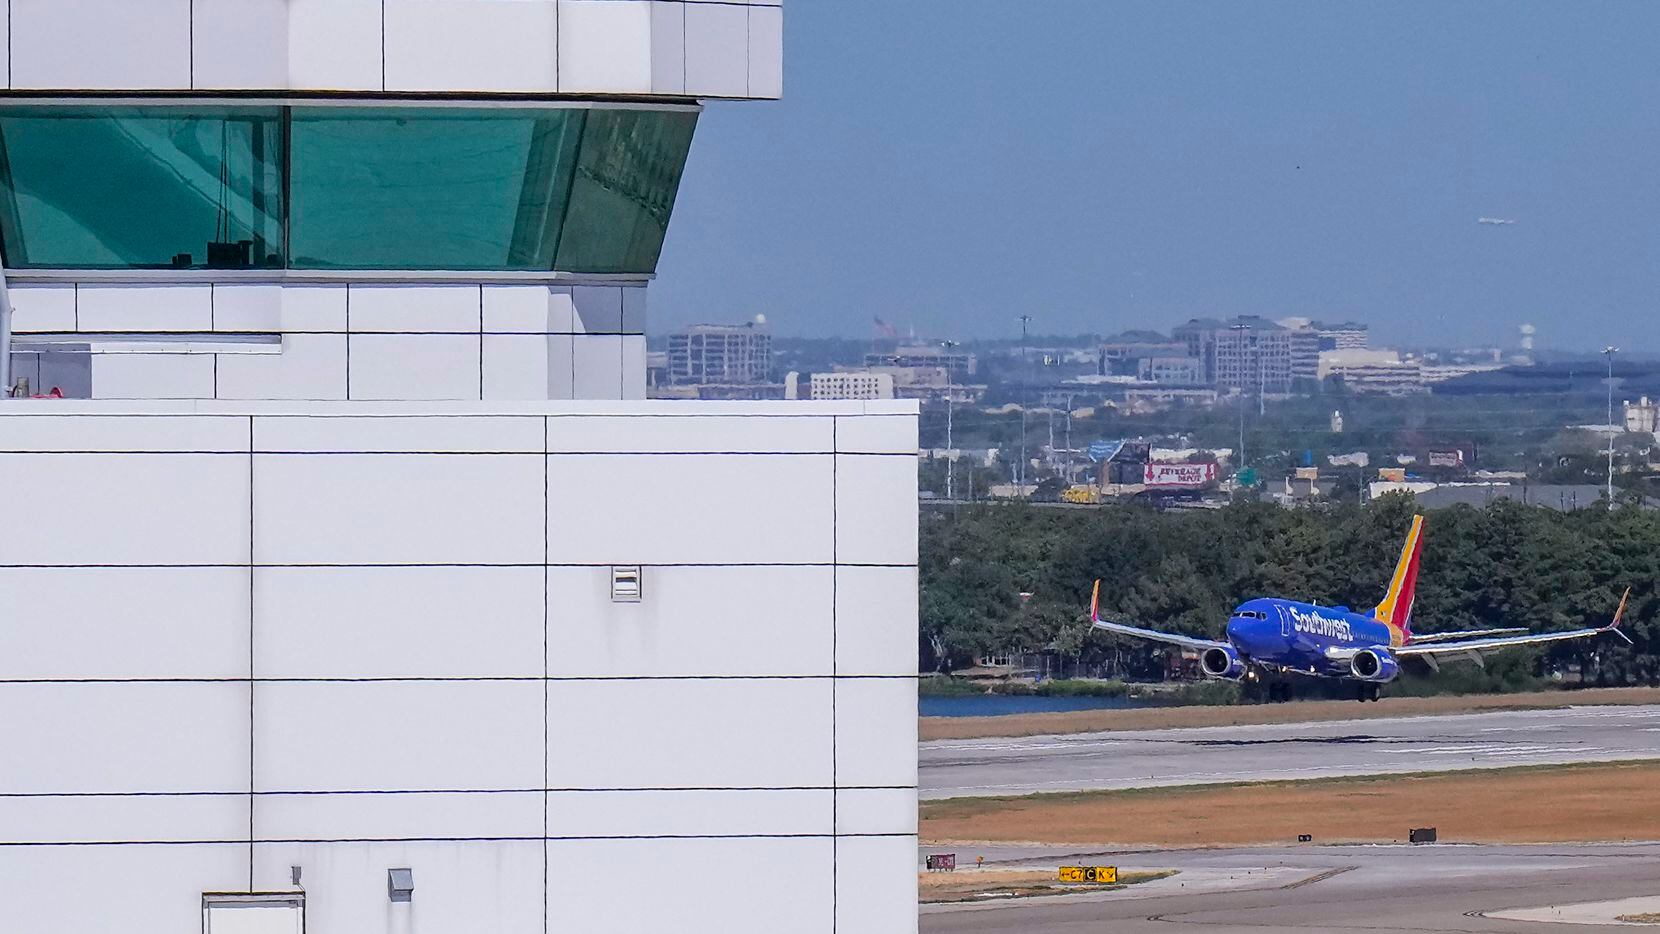 A Southwest Airlines flight lands at Dallas Love Field Airport on July 26.